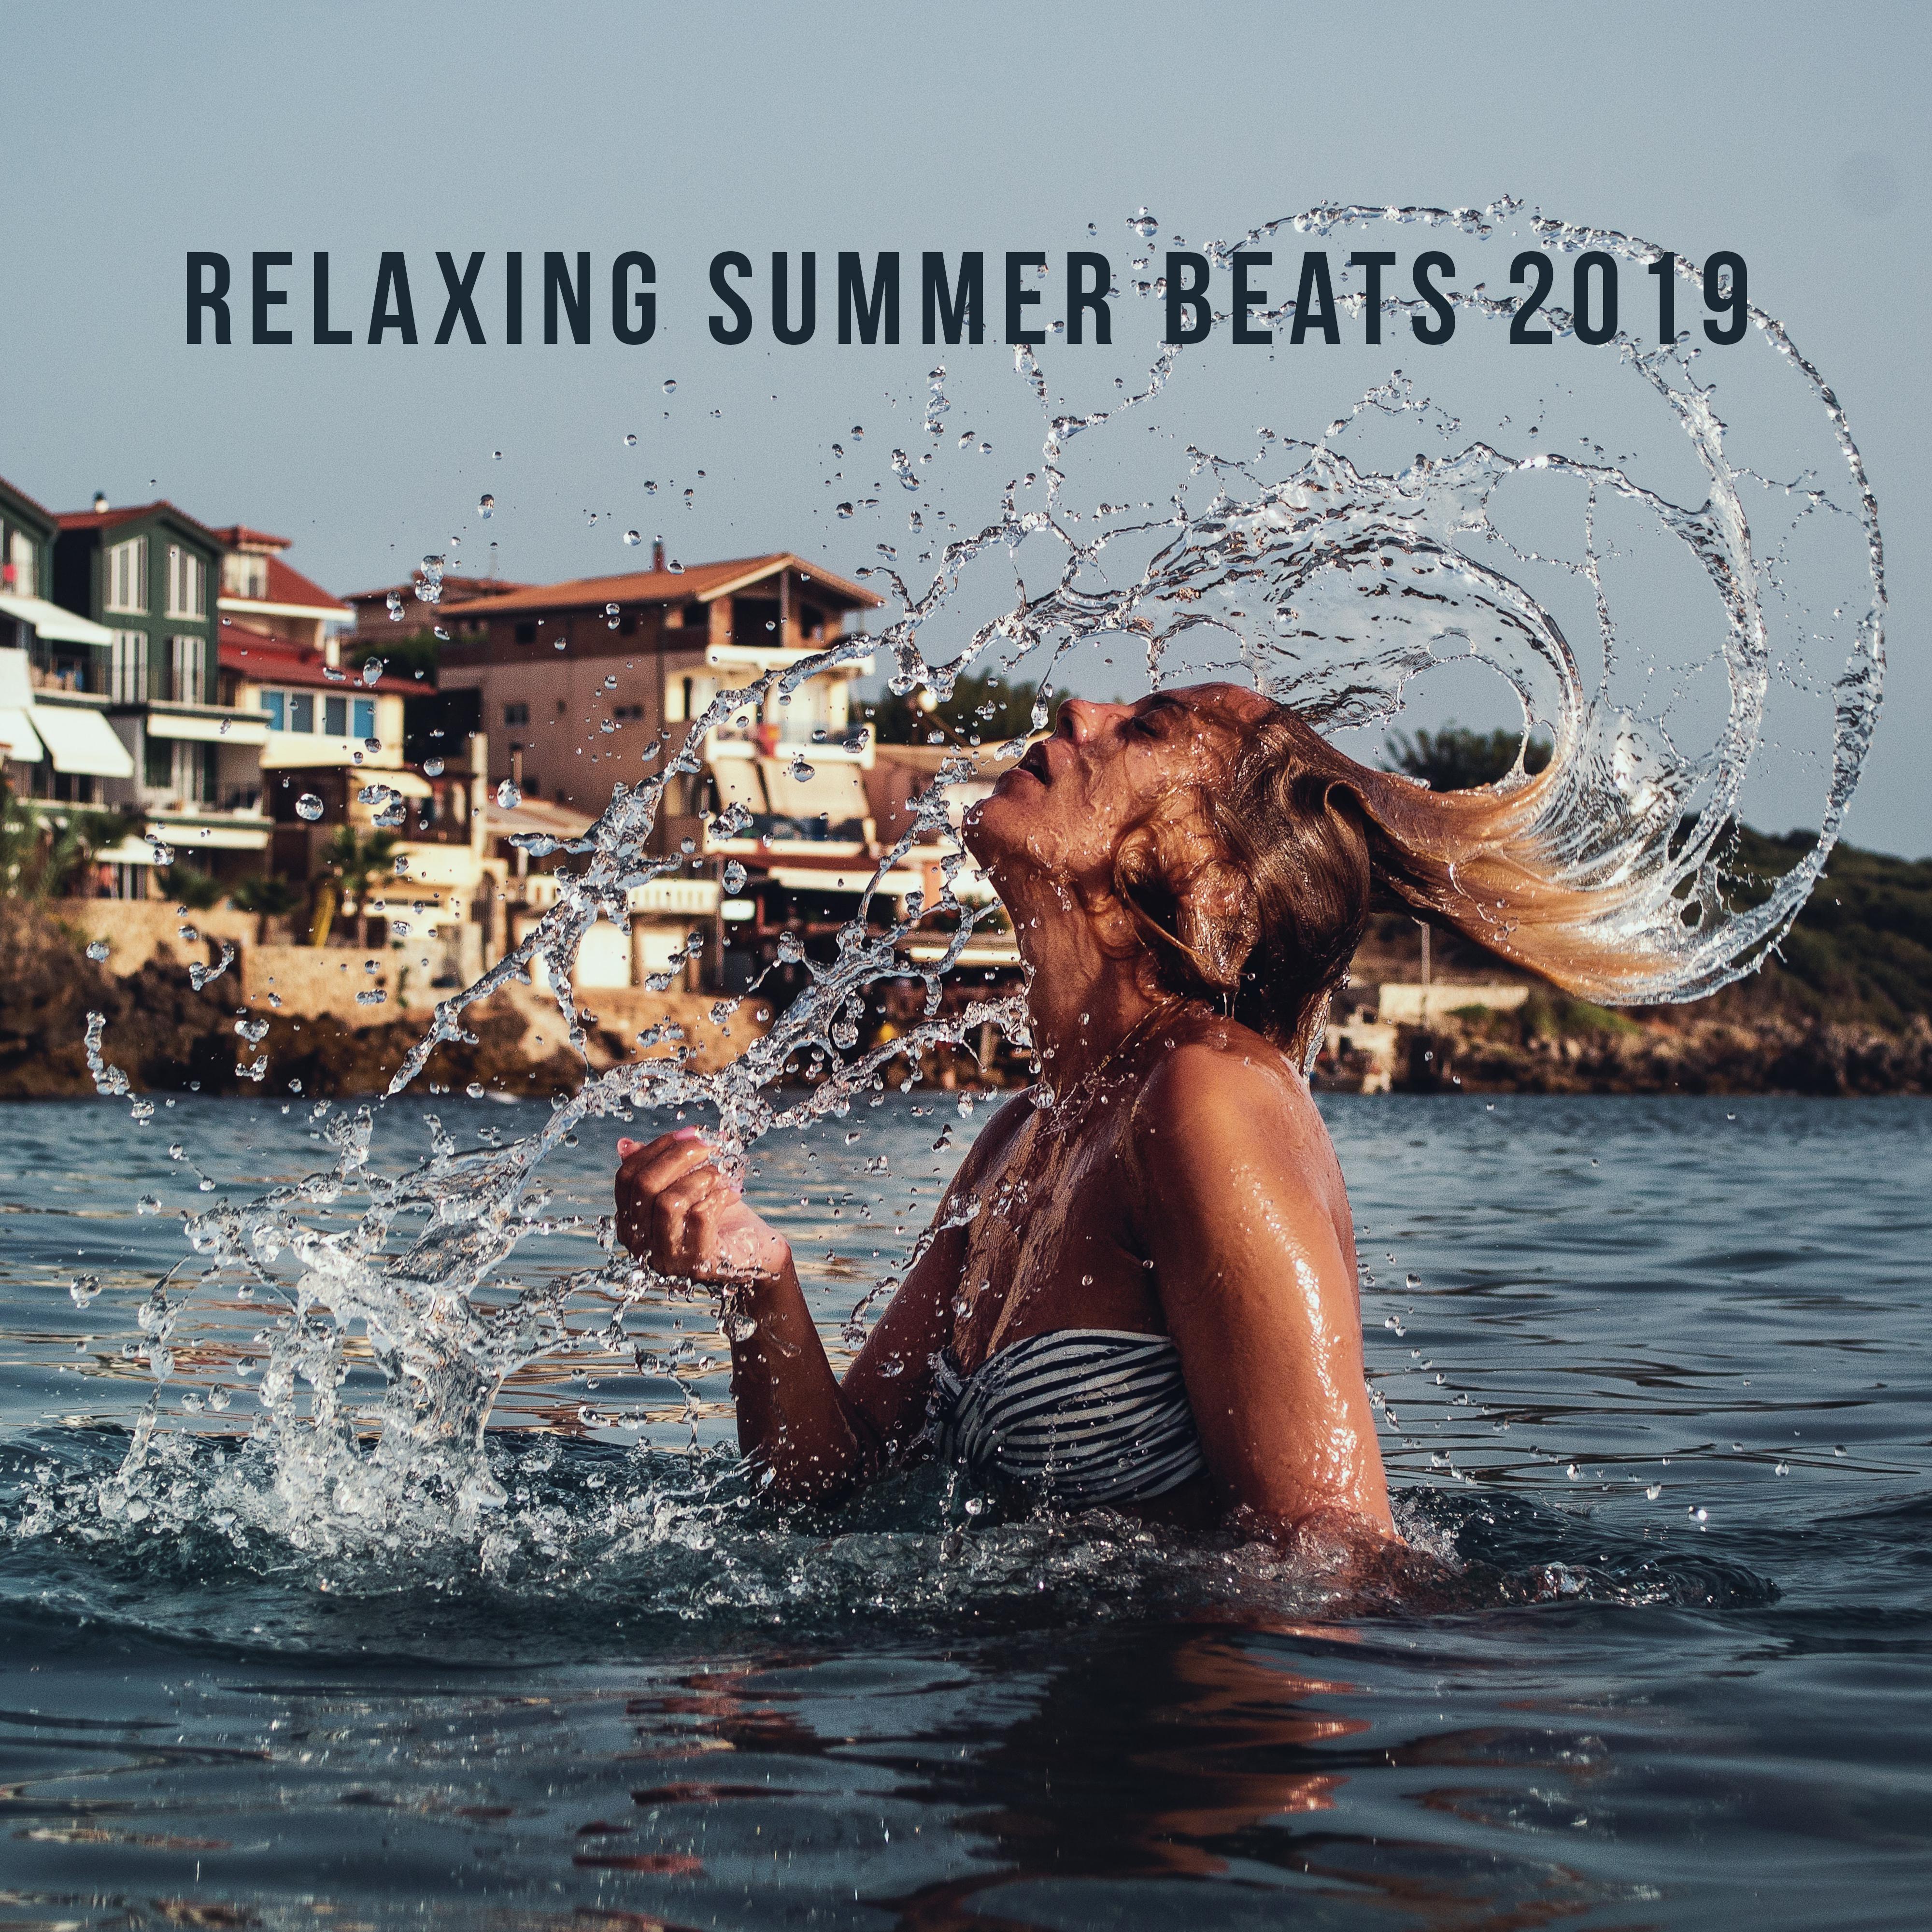 Relaxing Summer Beats 2019 – Ibiza 2019, Total Chill, Beach Party, Sunny Chill Out, Deep Relaxation